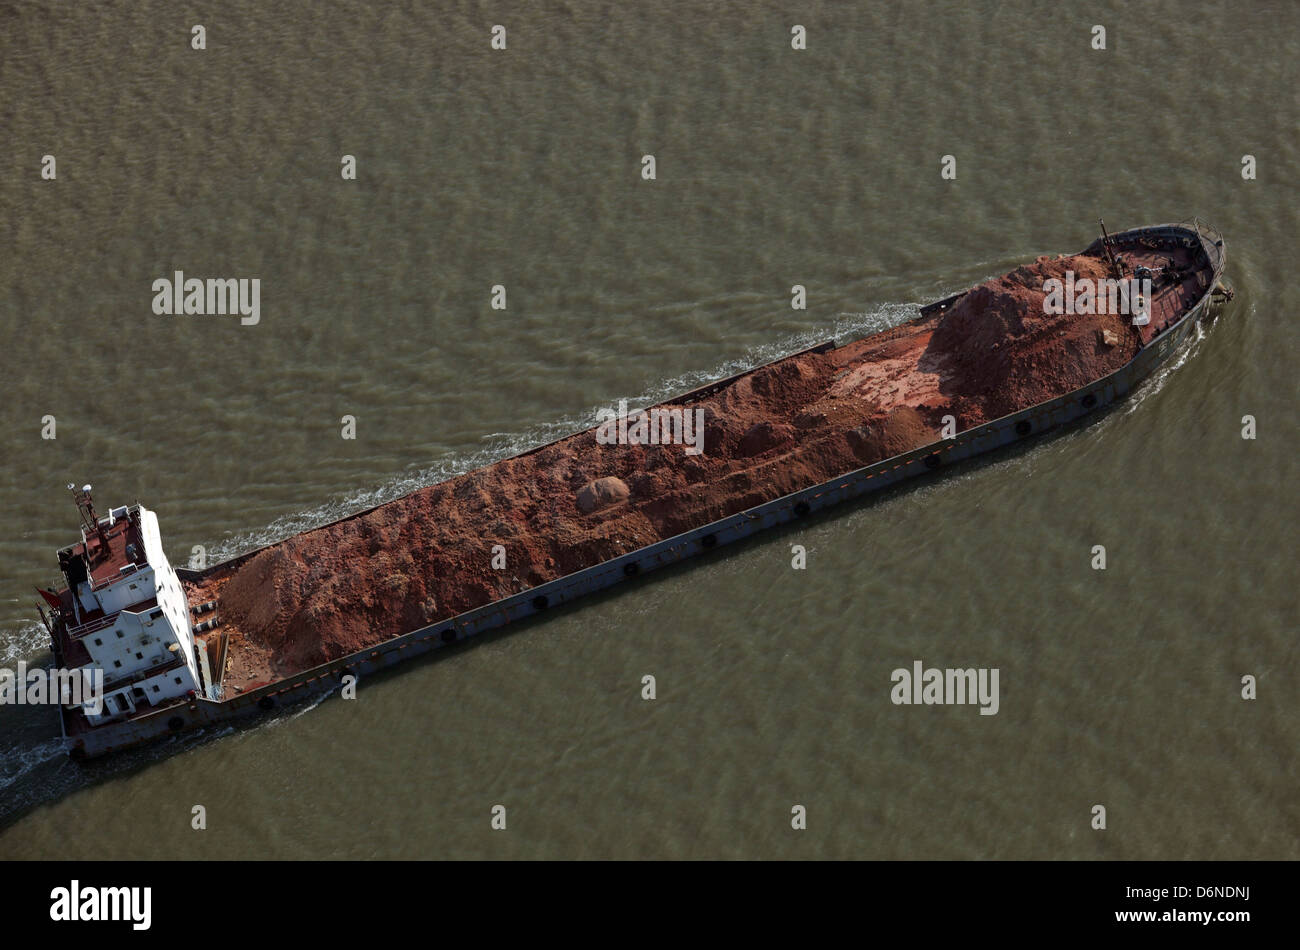 Macau, China, laden with sand cargo ship from a bird's perspective Stock Photo